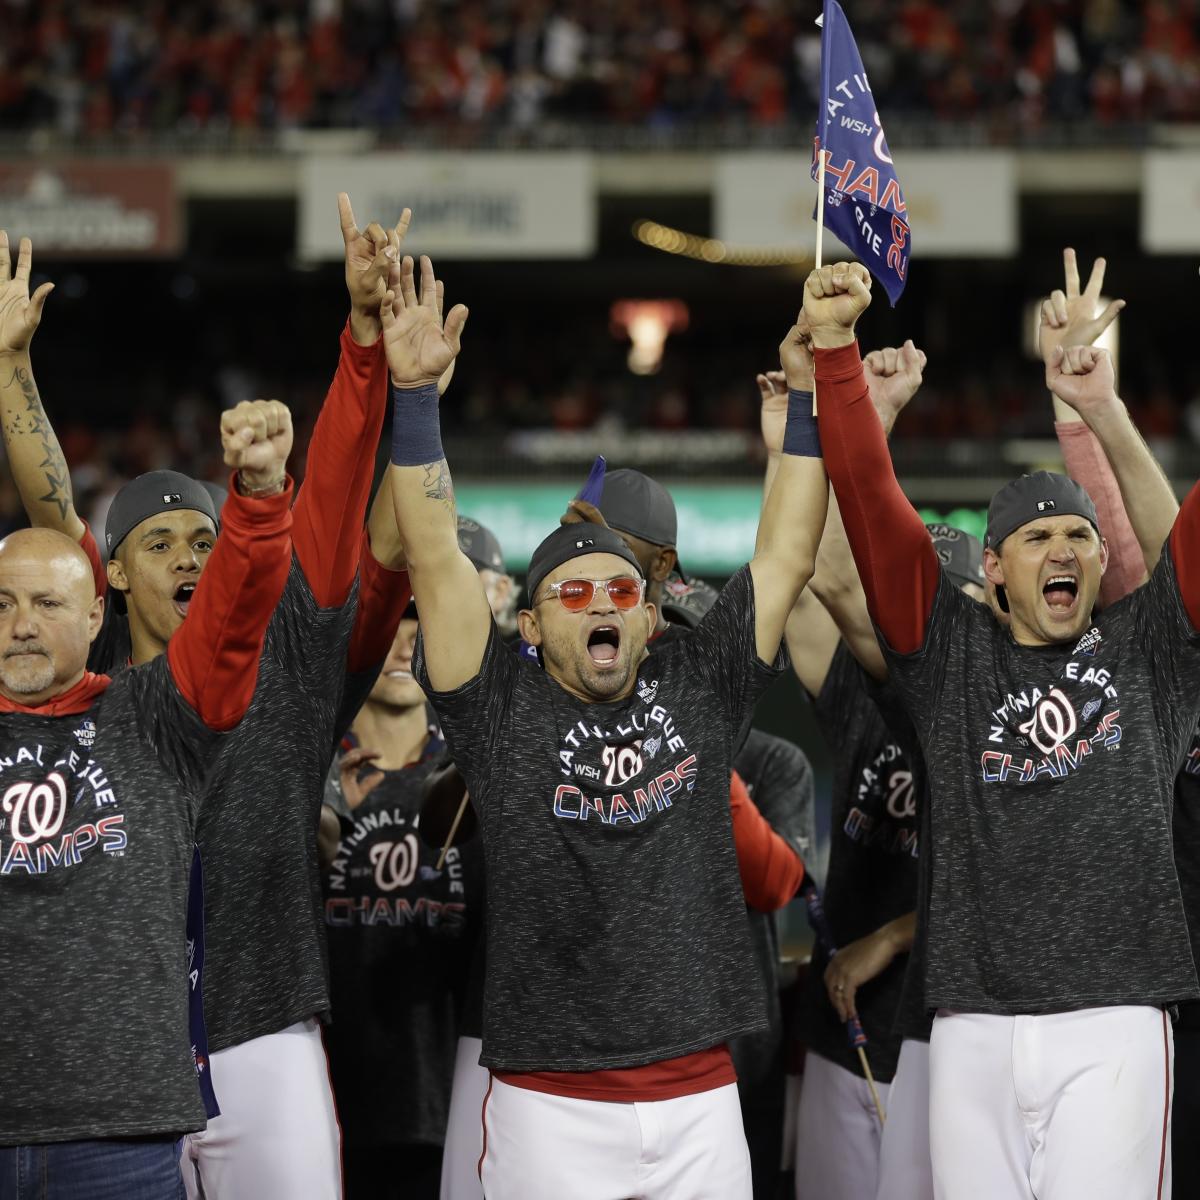 Cardinals vs. Nationals: Top Highlights, Key Stats and More from NLCS Game 4